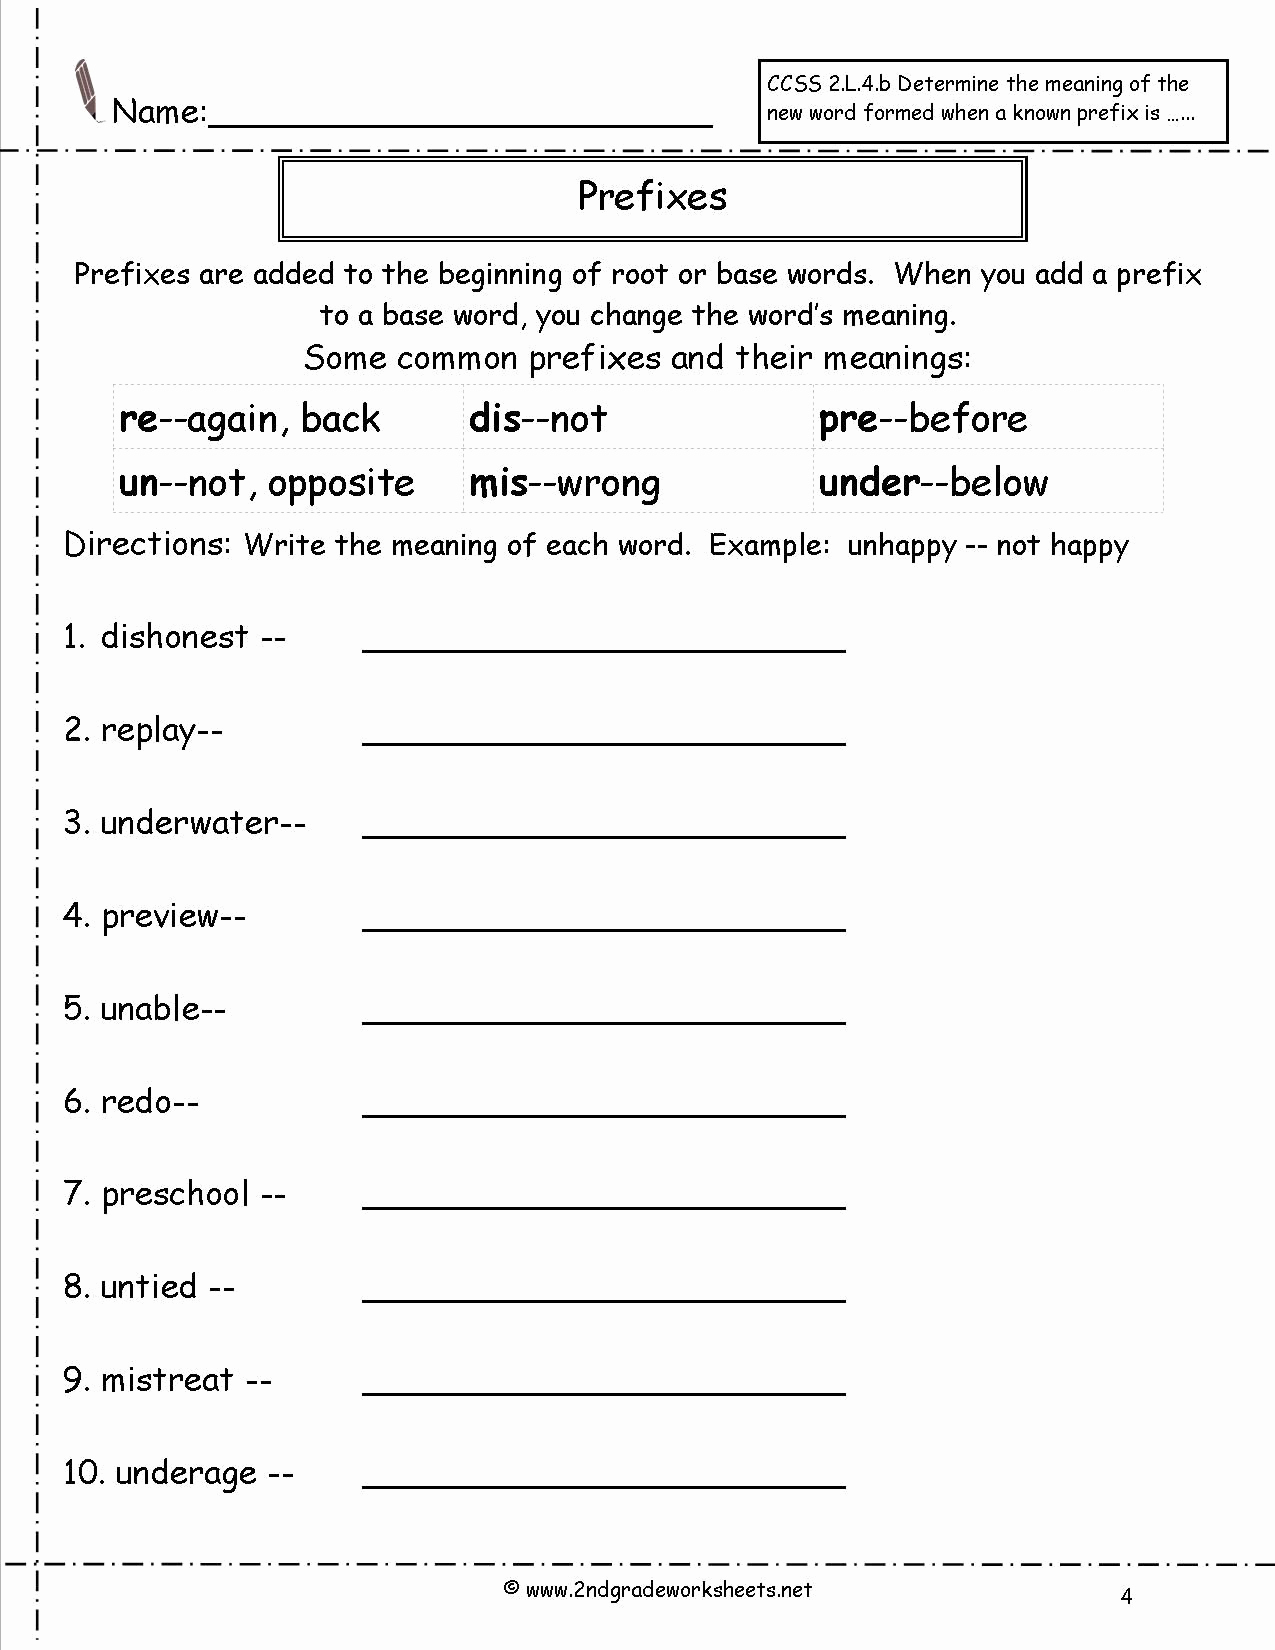 Suffix Worksheets 4th Grade Awesome 20 Suffix Worksheets for 4th Grade